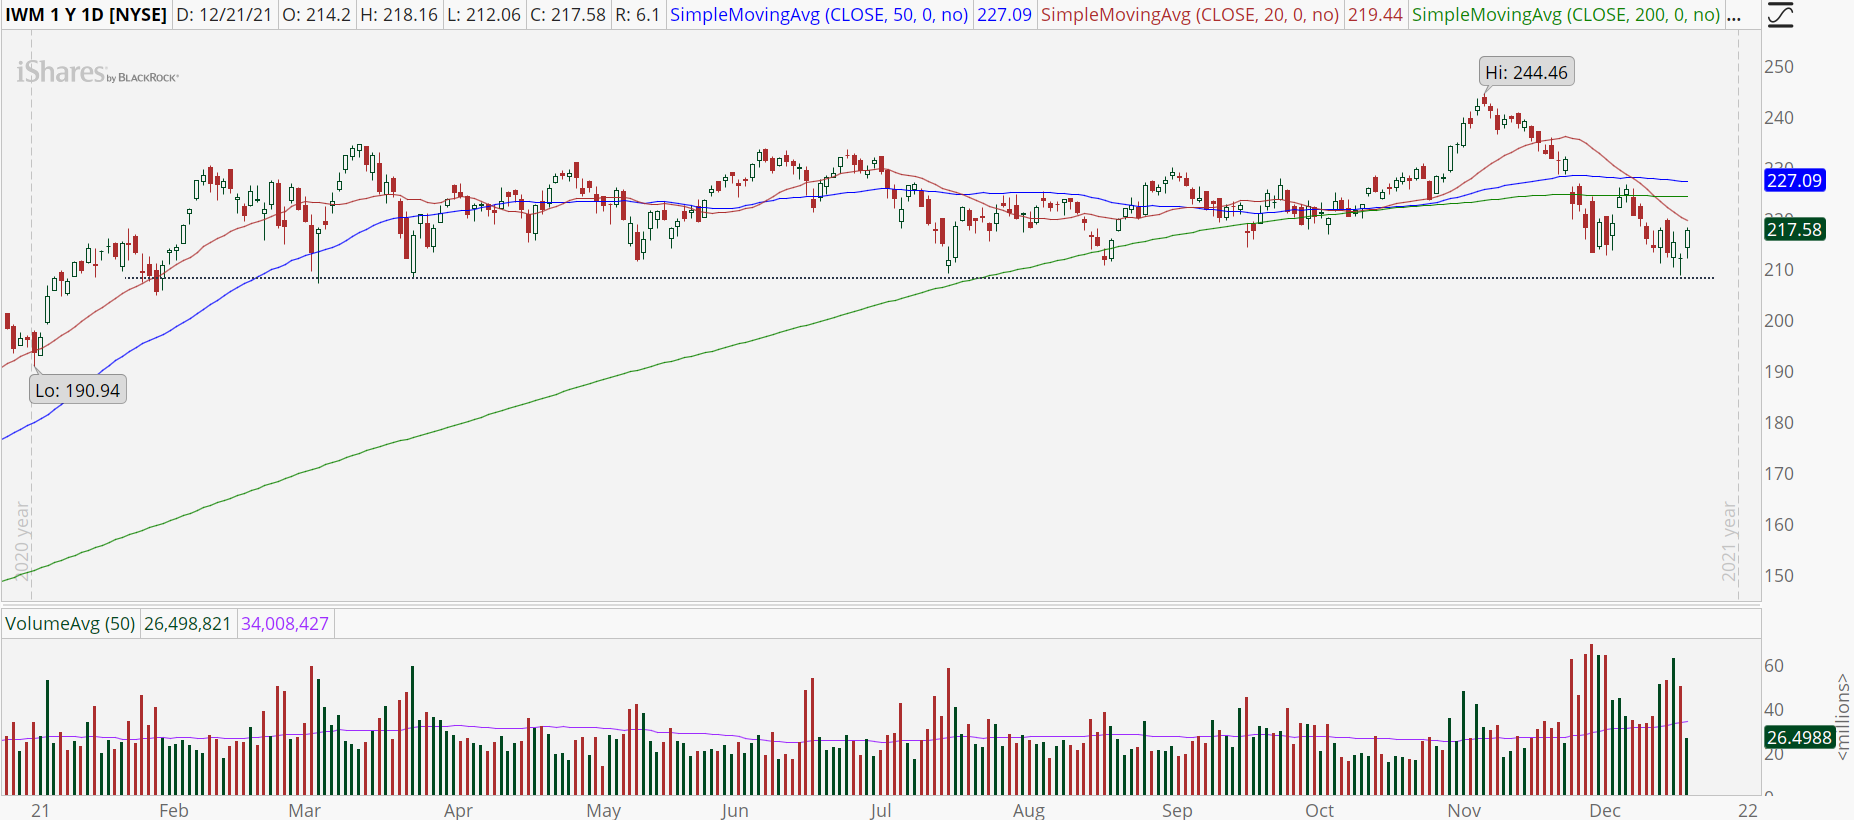 iShares Russell 2000 ETF (IWM) stock chart with support bounce